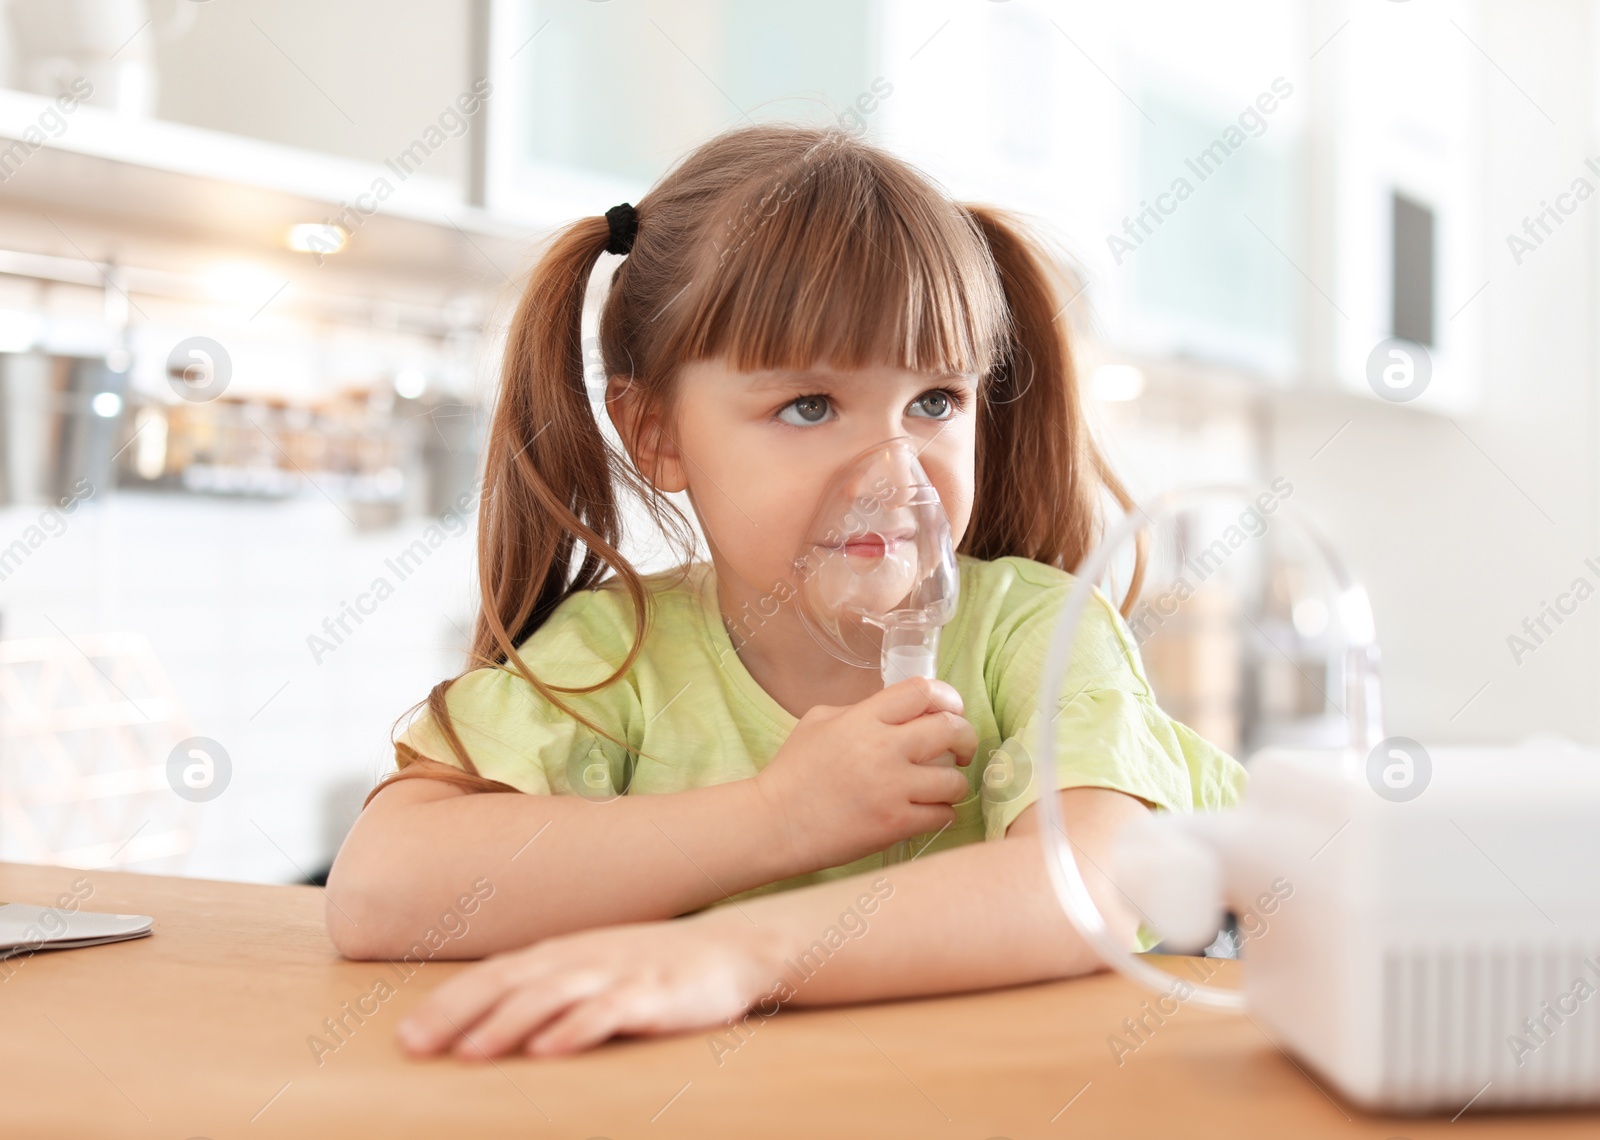 Photo of Little girl using asthma machine at table in kitchen